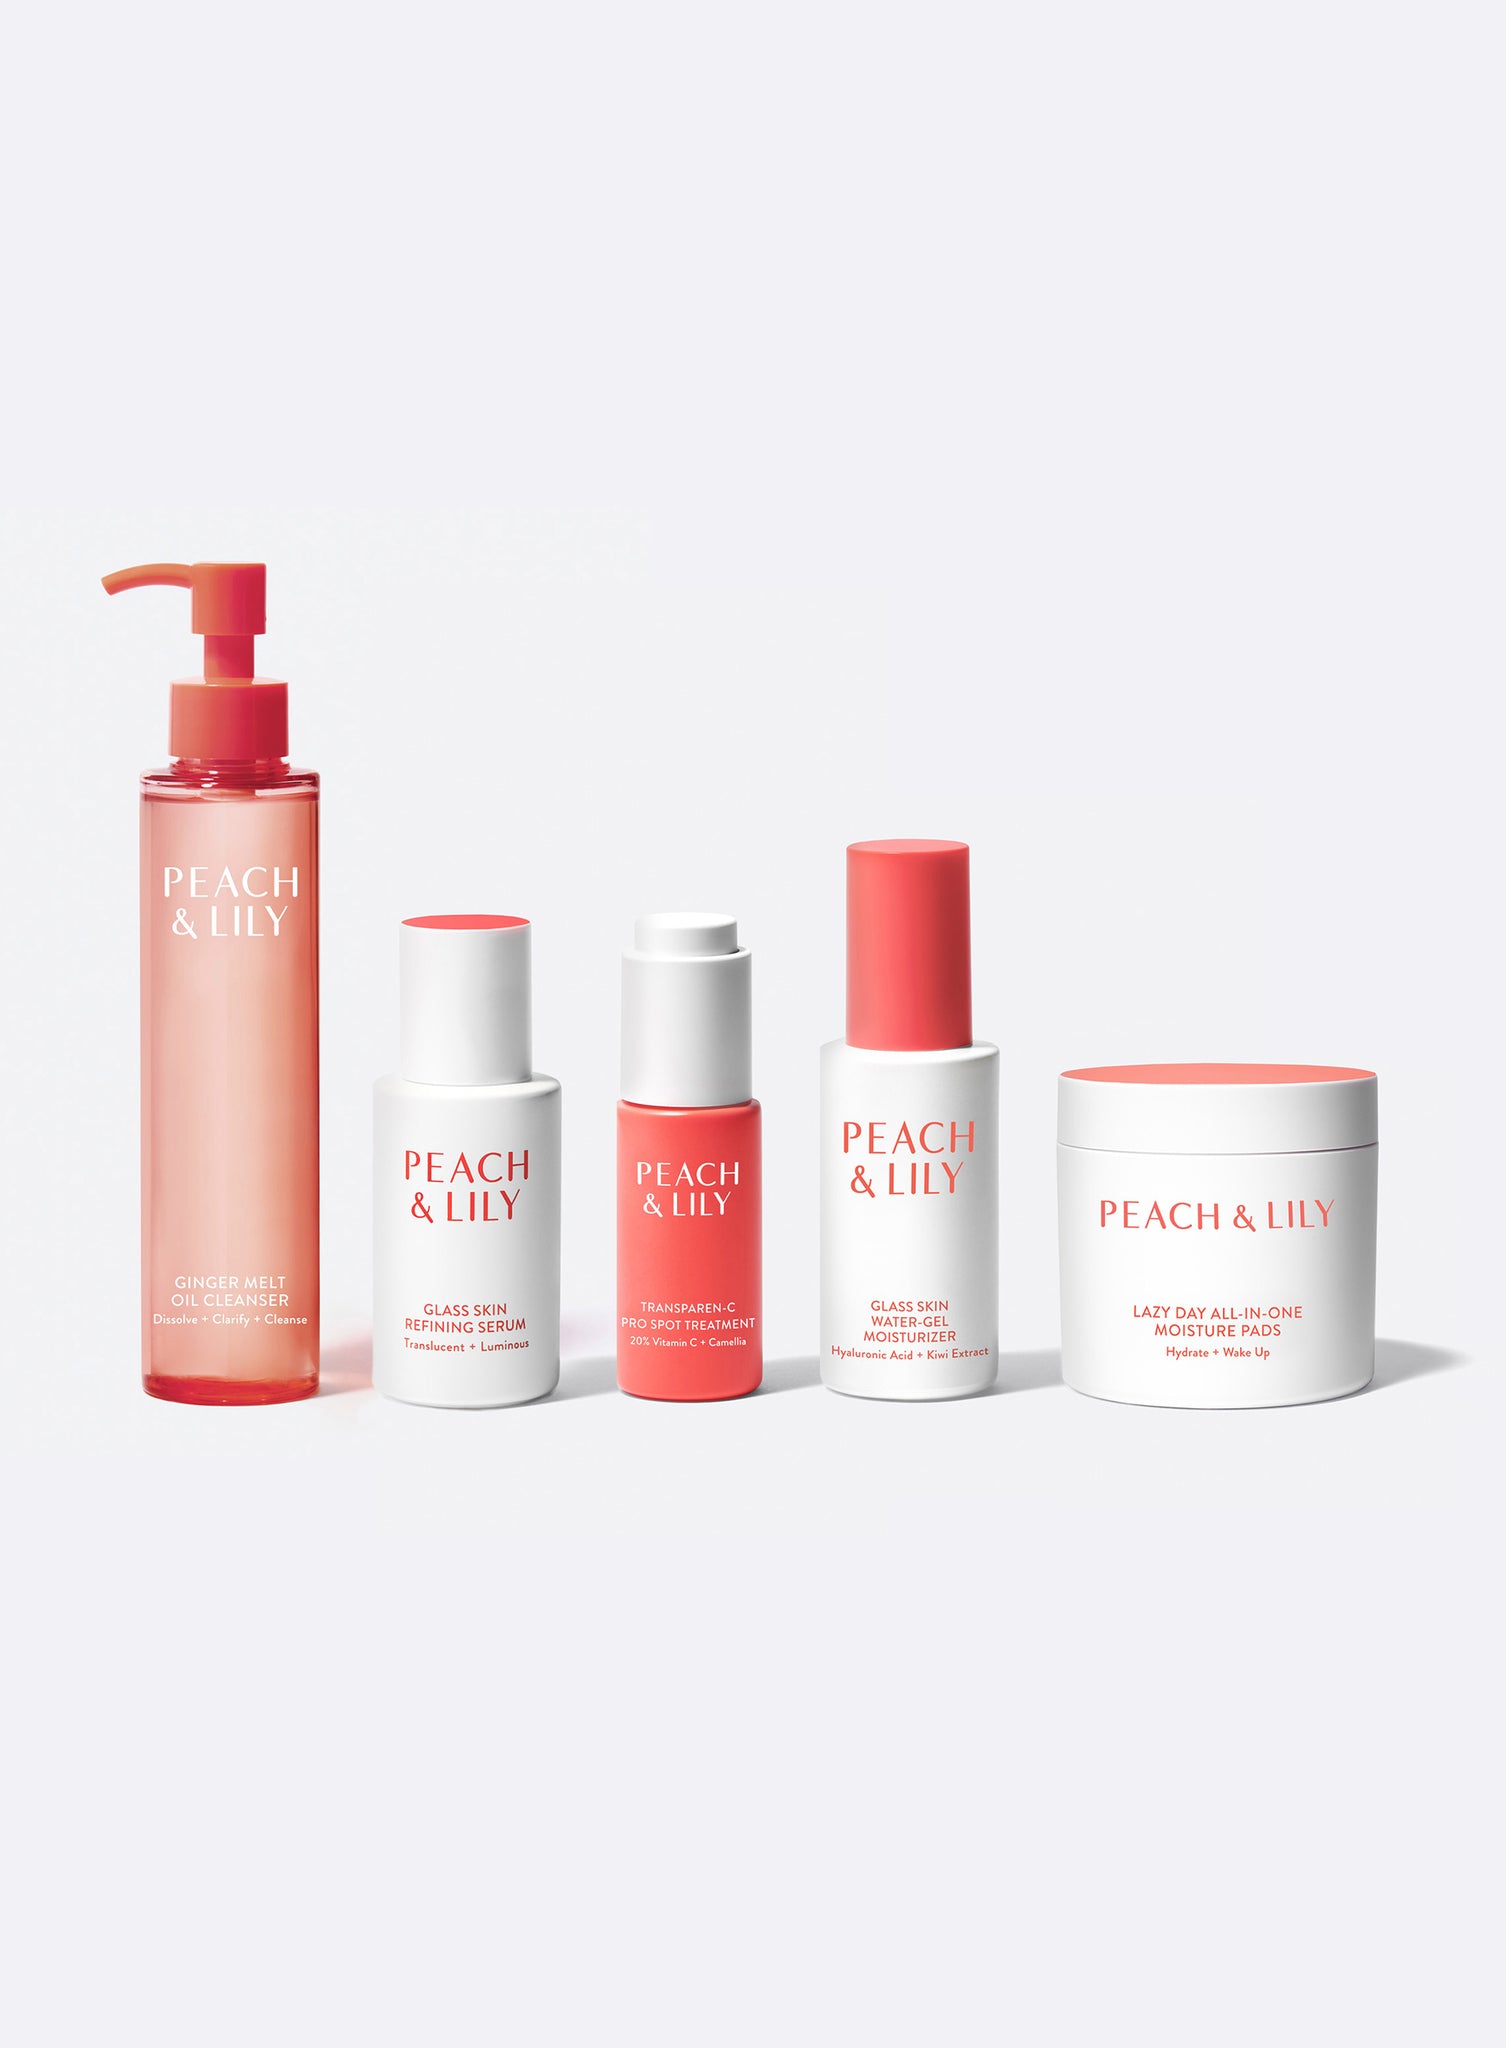 A line up of the products included in the Peach & Lily Peach Fuzz Kit for pregnancy and postpartum skin health including Ginger Melt Oil Cleanser, Glass Skin Refining Serum, Transparen-C Pro Spot Treatment, Glass Skin Water Gel Moisturizer, and Lazy Day All-in-One Moisture Pads